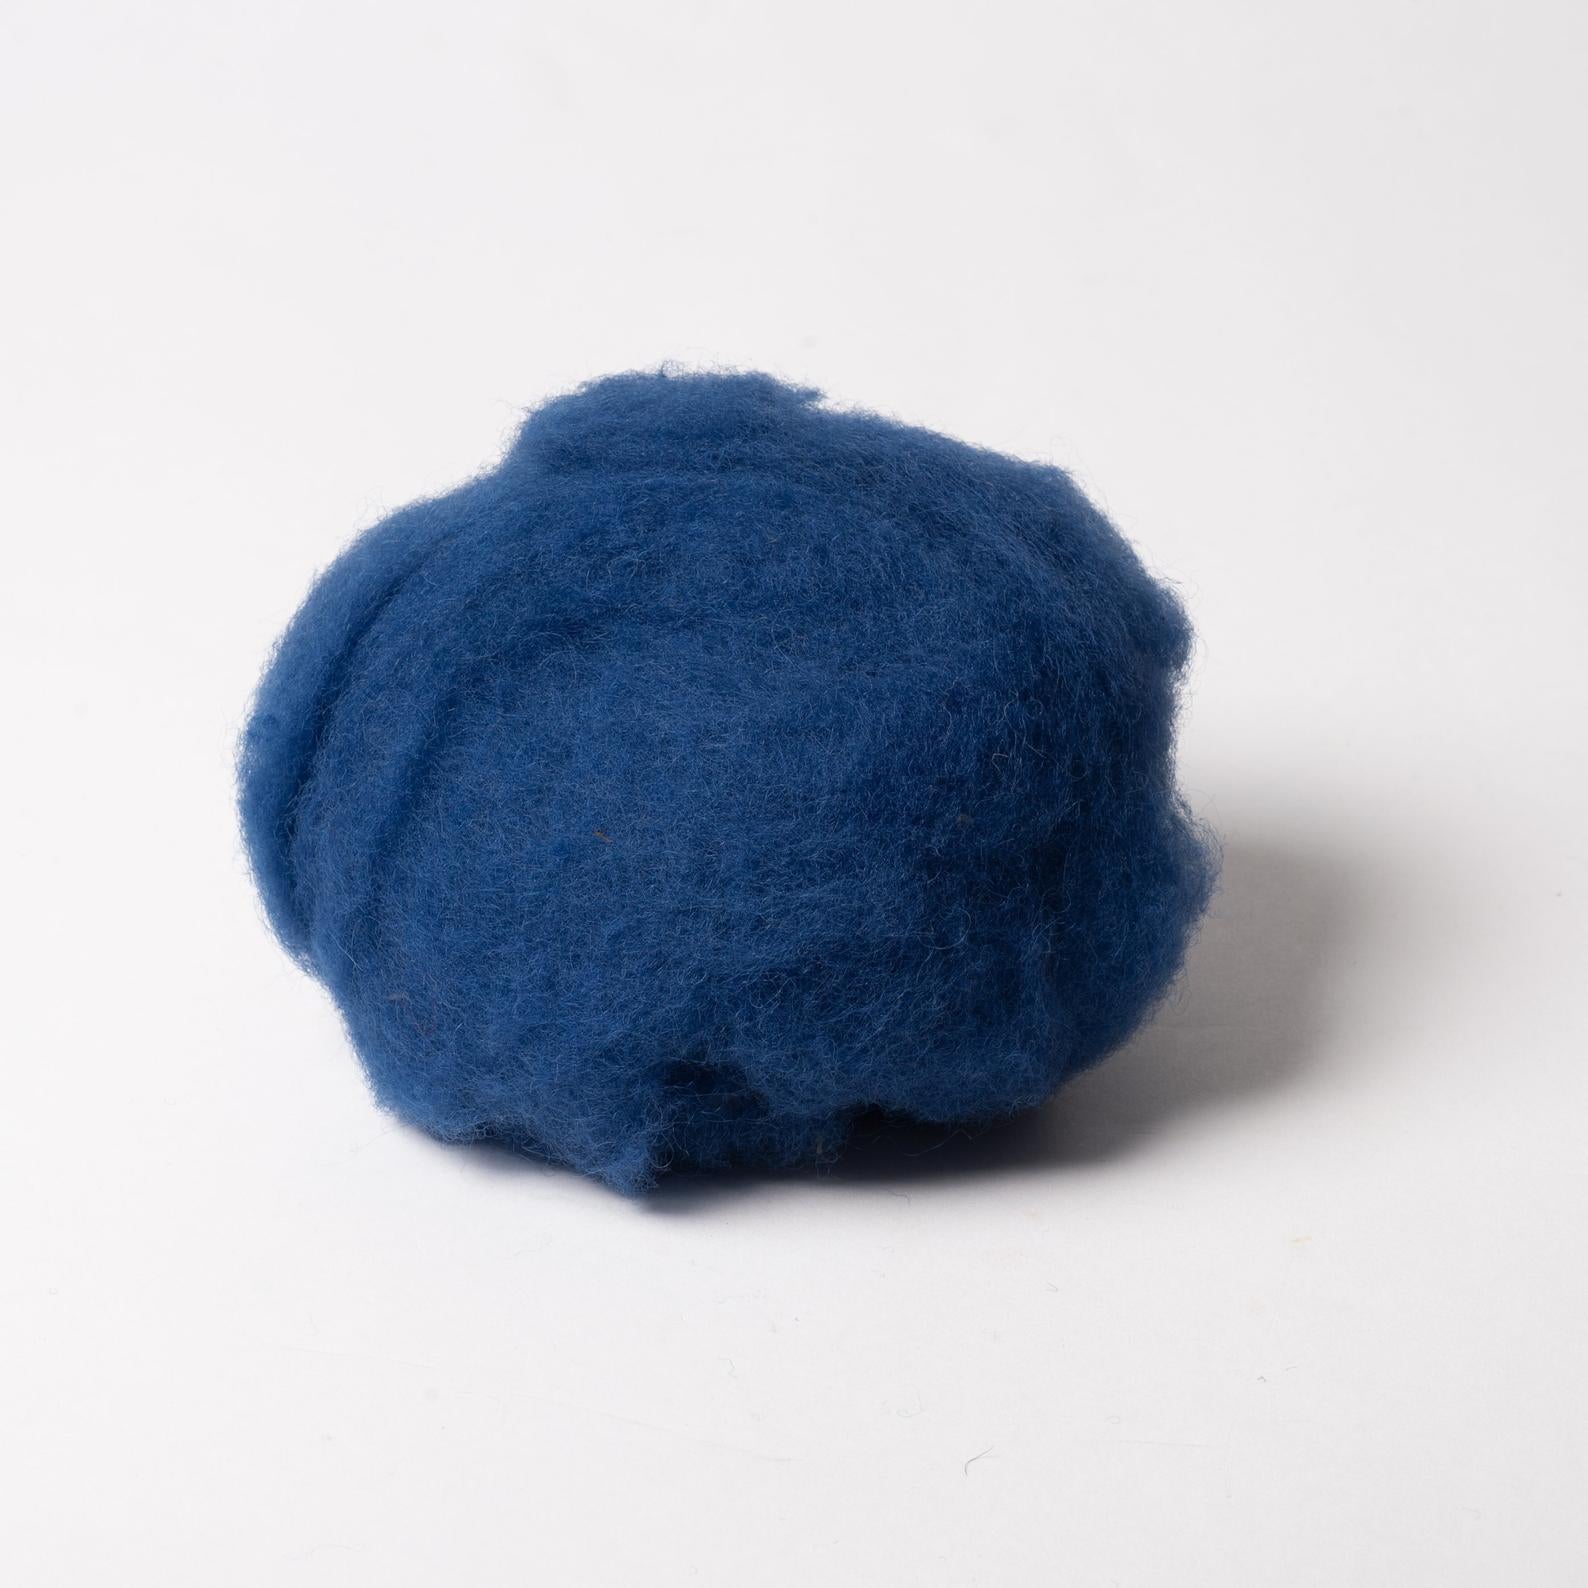 Blue Wool for wet felting workshops from Tyrolean Sheep